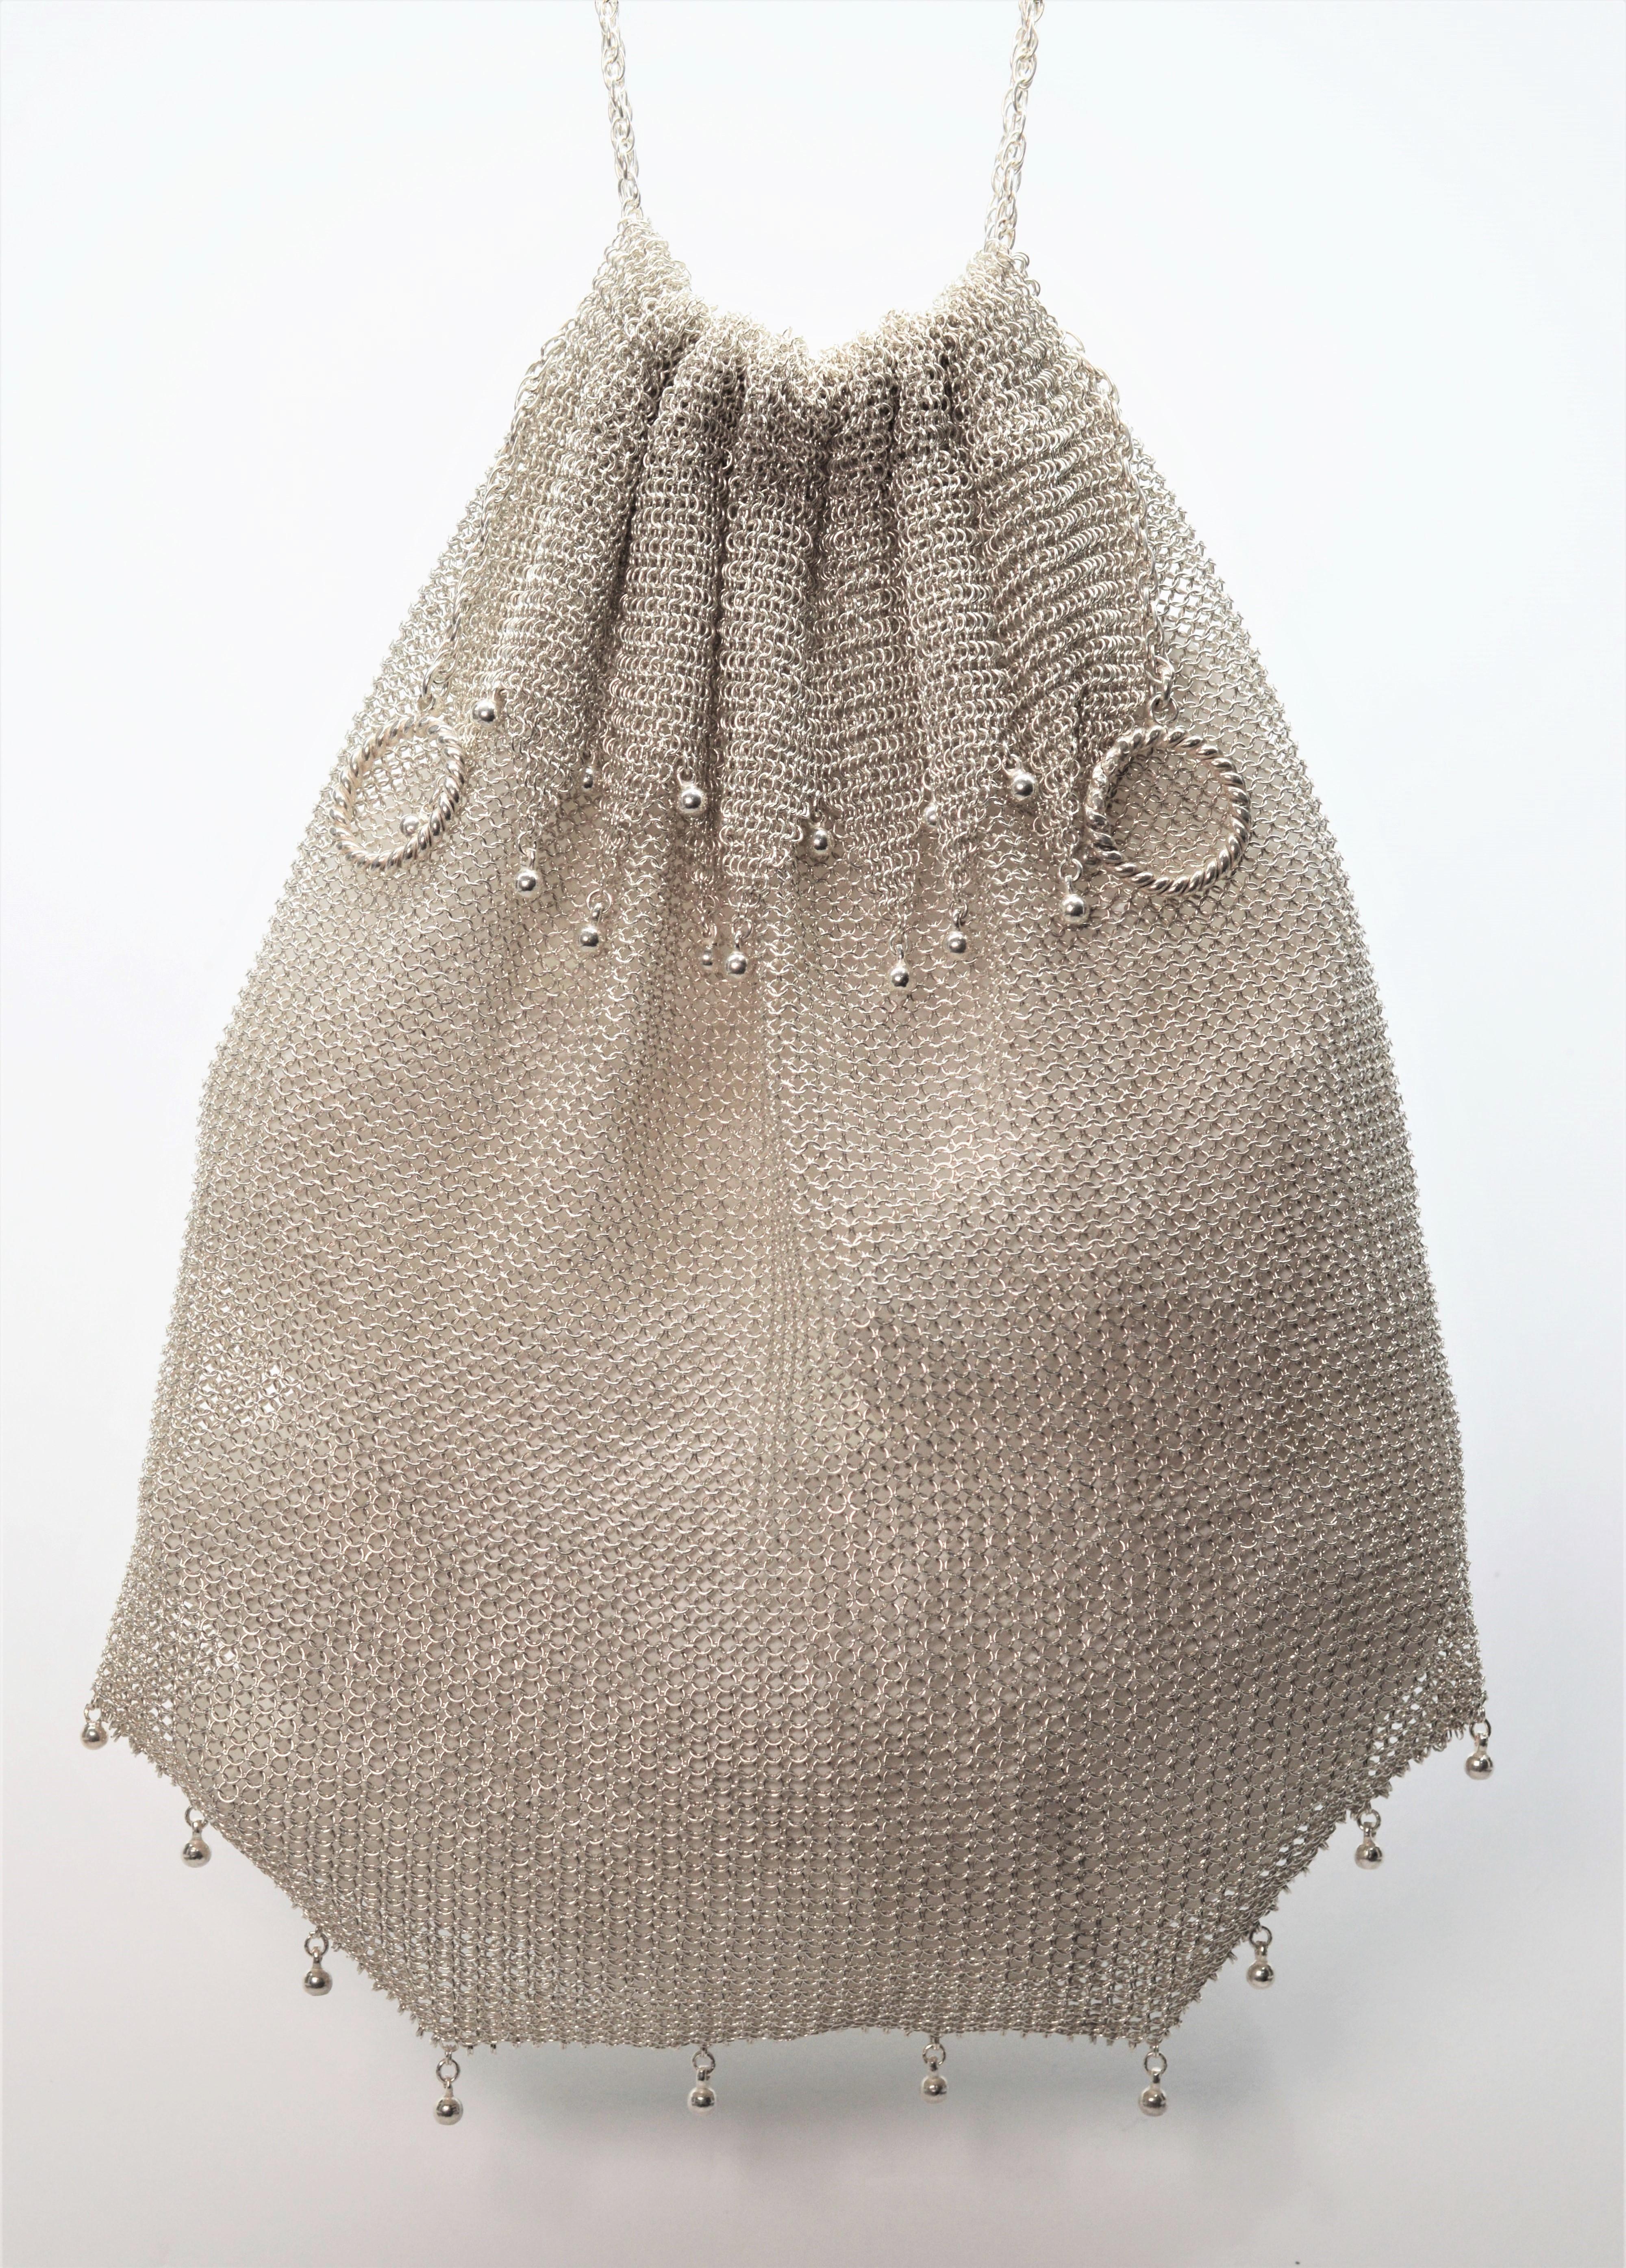 An elegant accessory for bridal or that special evening occasion. Circa pre-war, this finely made continental European lady's evening bag is entirely made of sterling silver. The neck of this drawstring purse is enhanced with a decorative collar